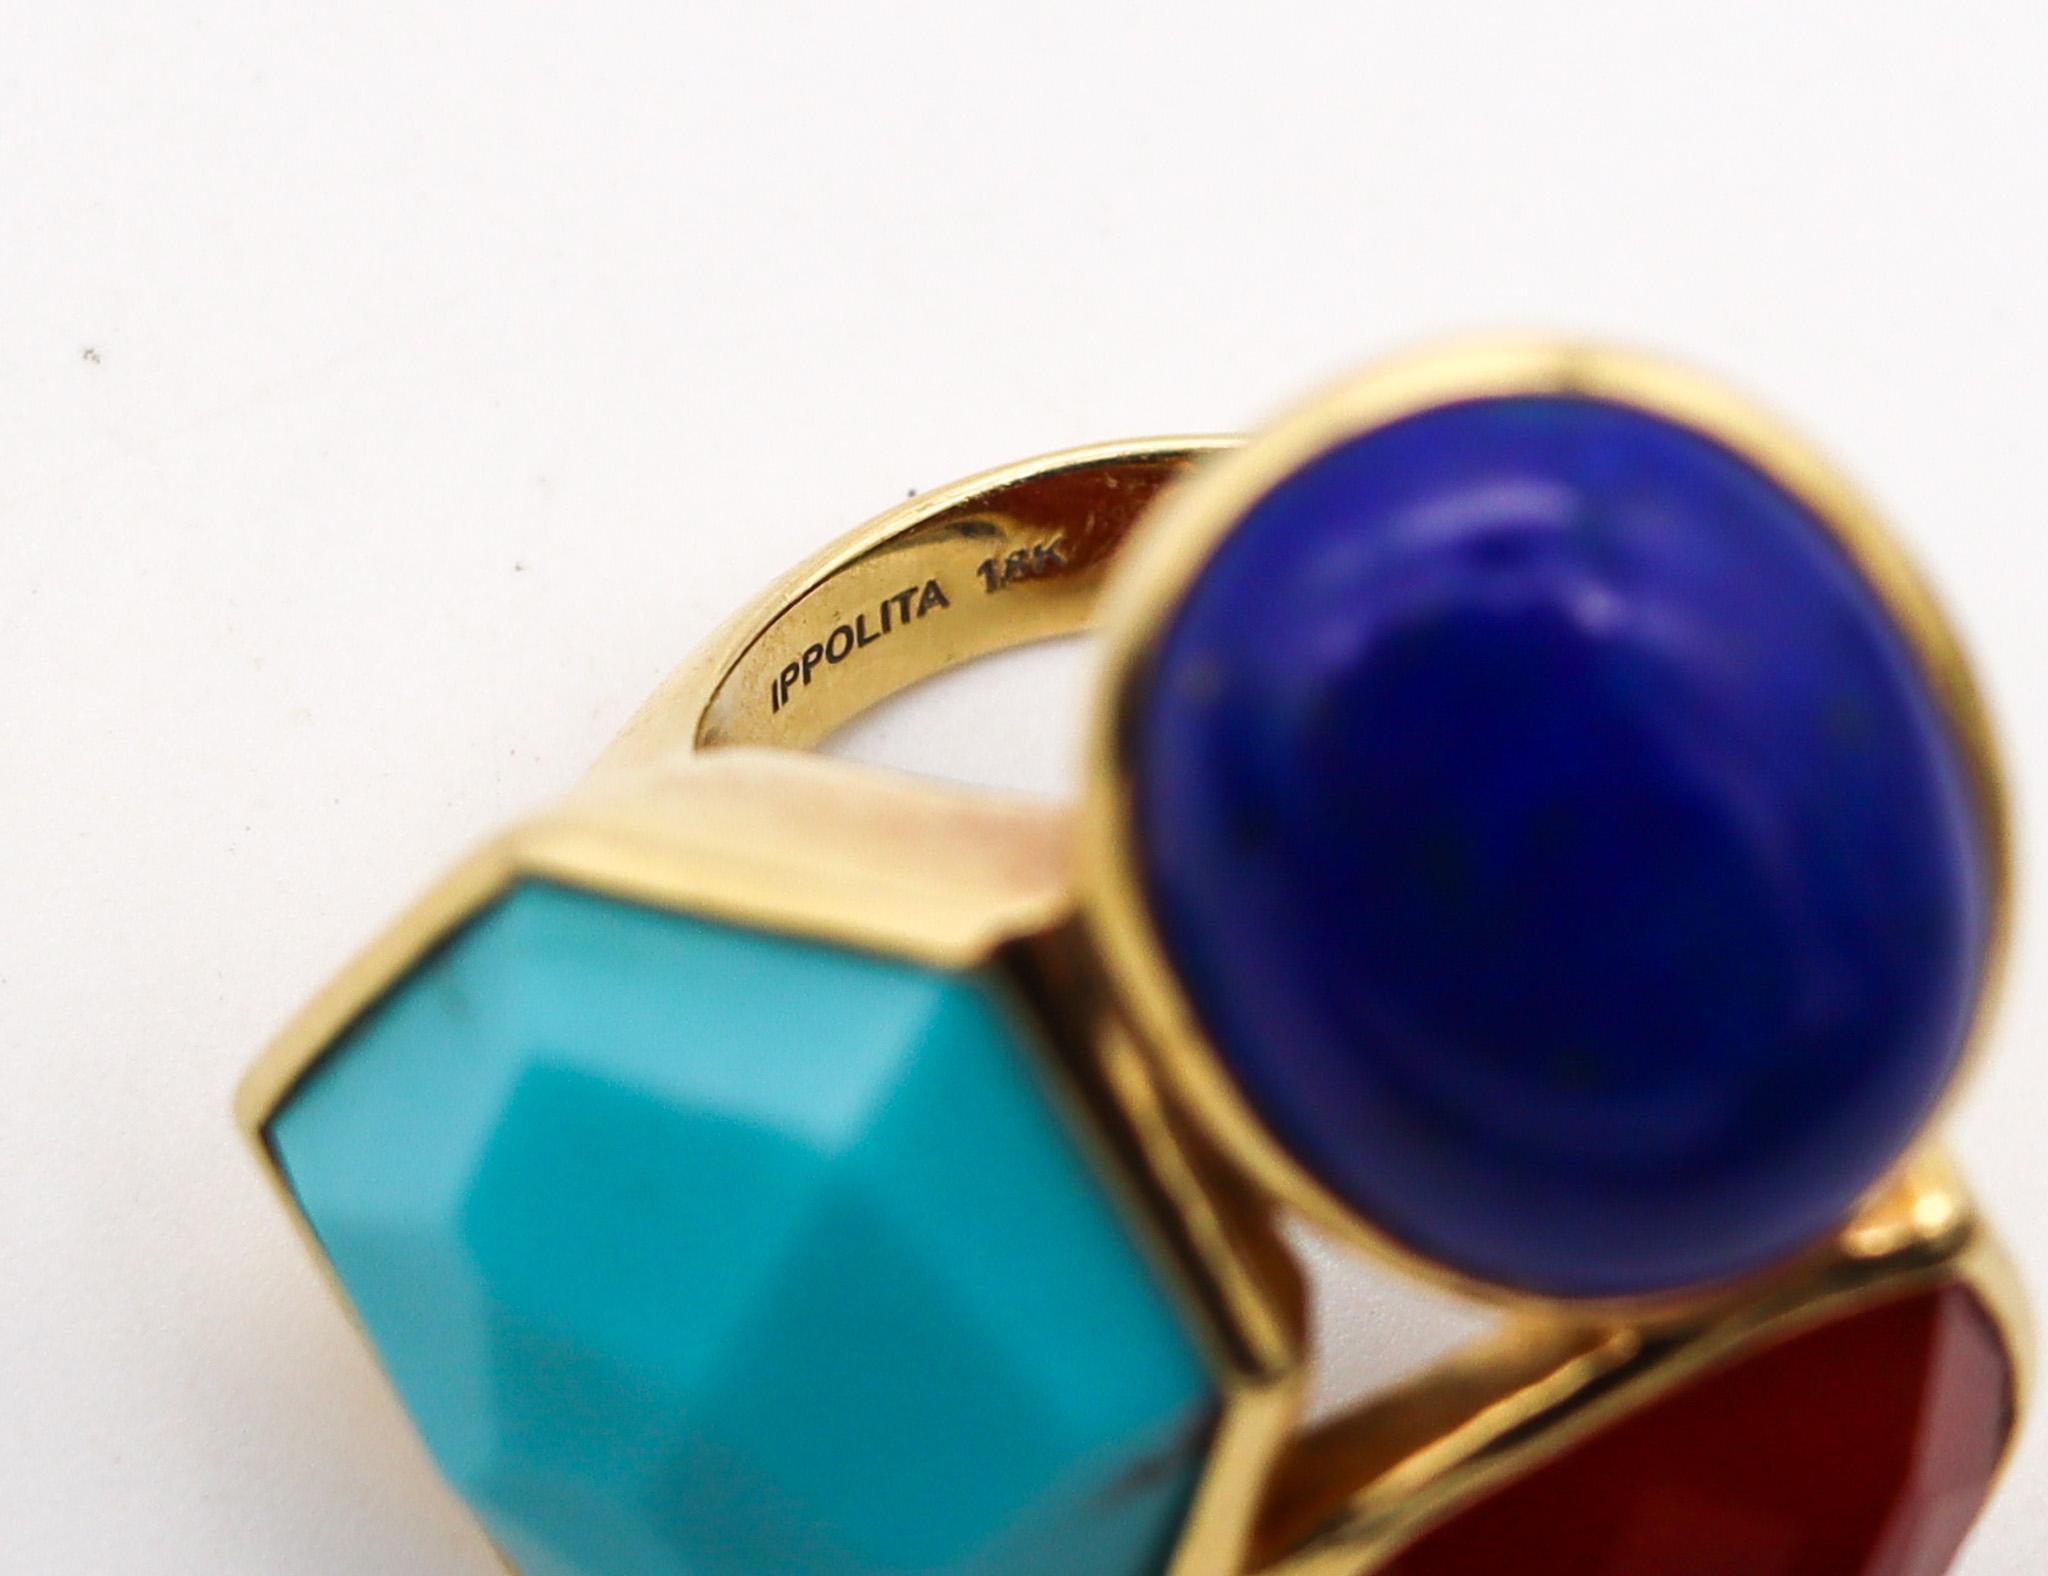 Ippolita Colorful Cocktail Ring In 18Kt Gold Turquoise Blue Lapis And Carnelian In Excellent Condition For Sale In Miami, FL